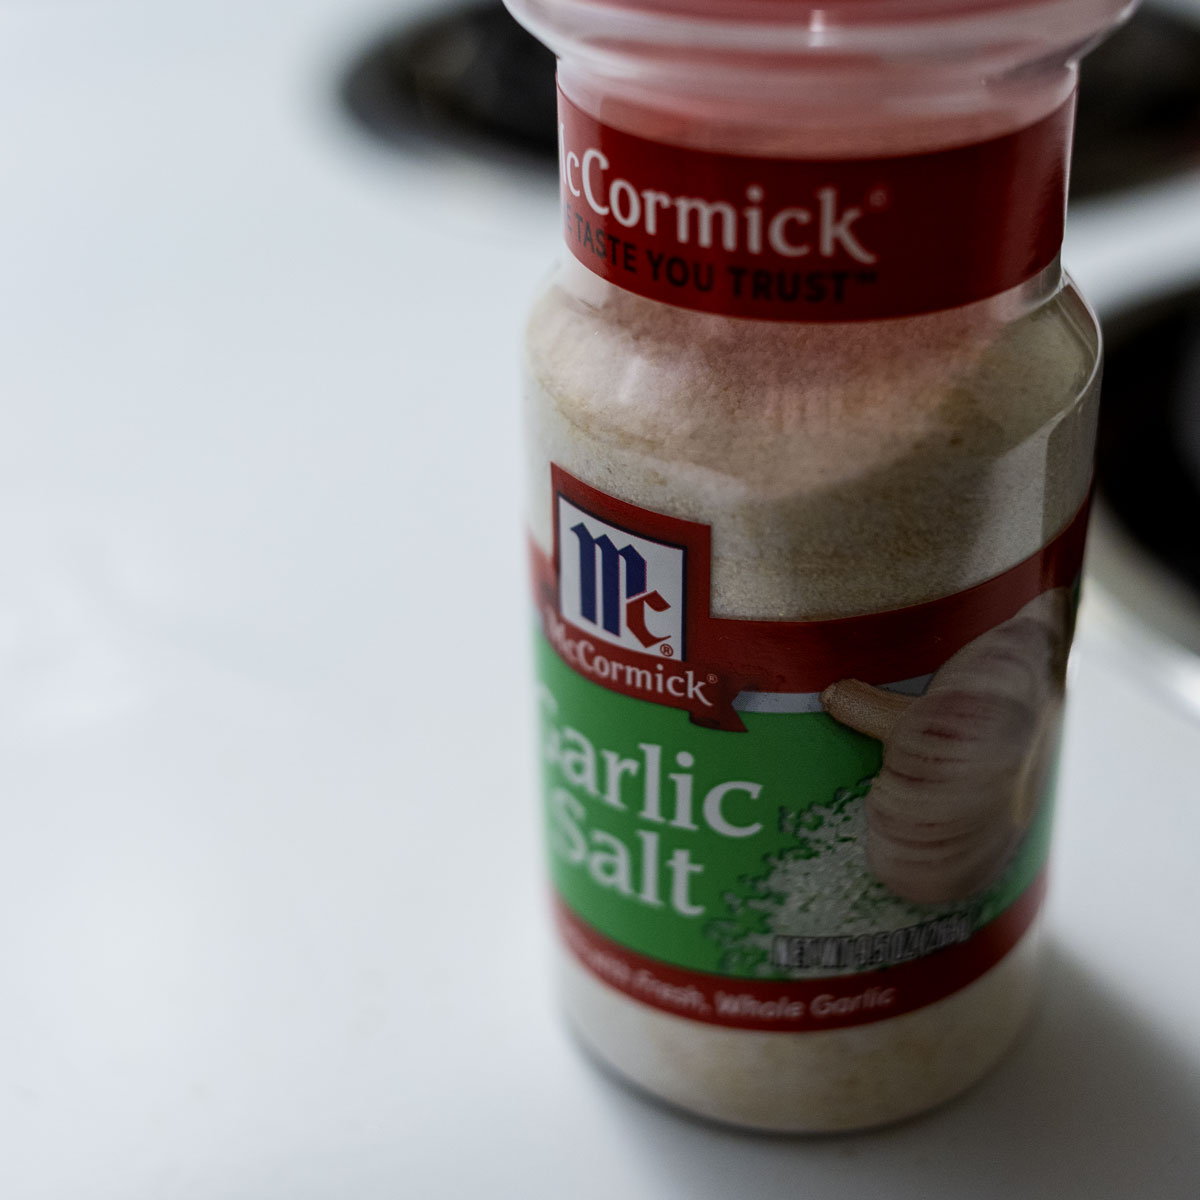 A garlic jar lies in focus within the depth-of-field while the background is left blurry and out of focus drawing attention to the subject.